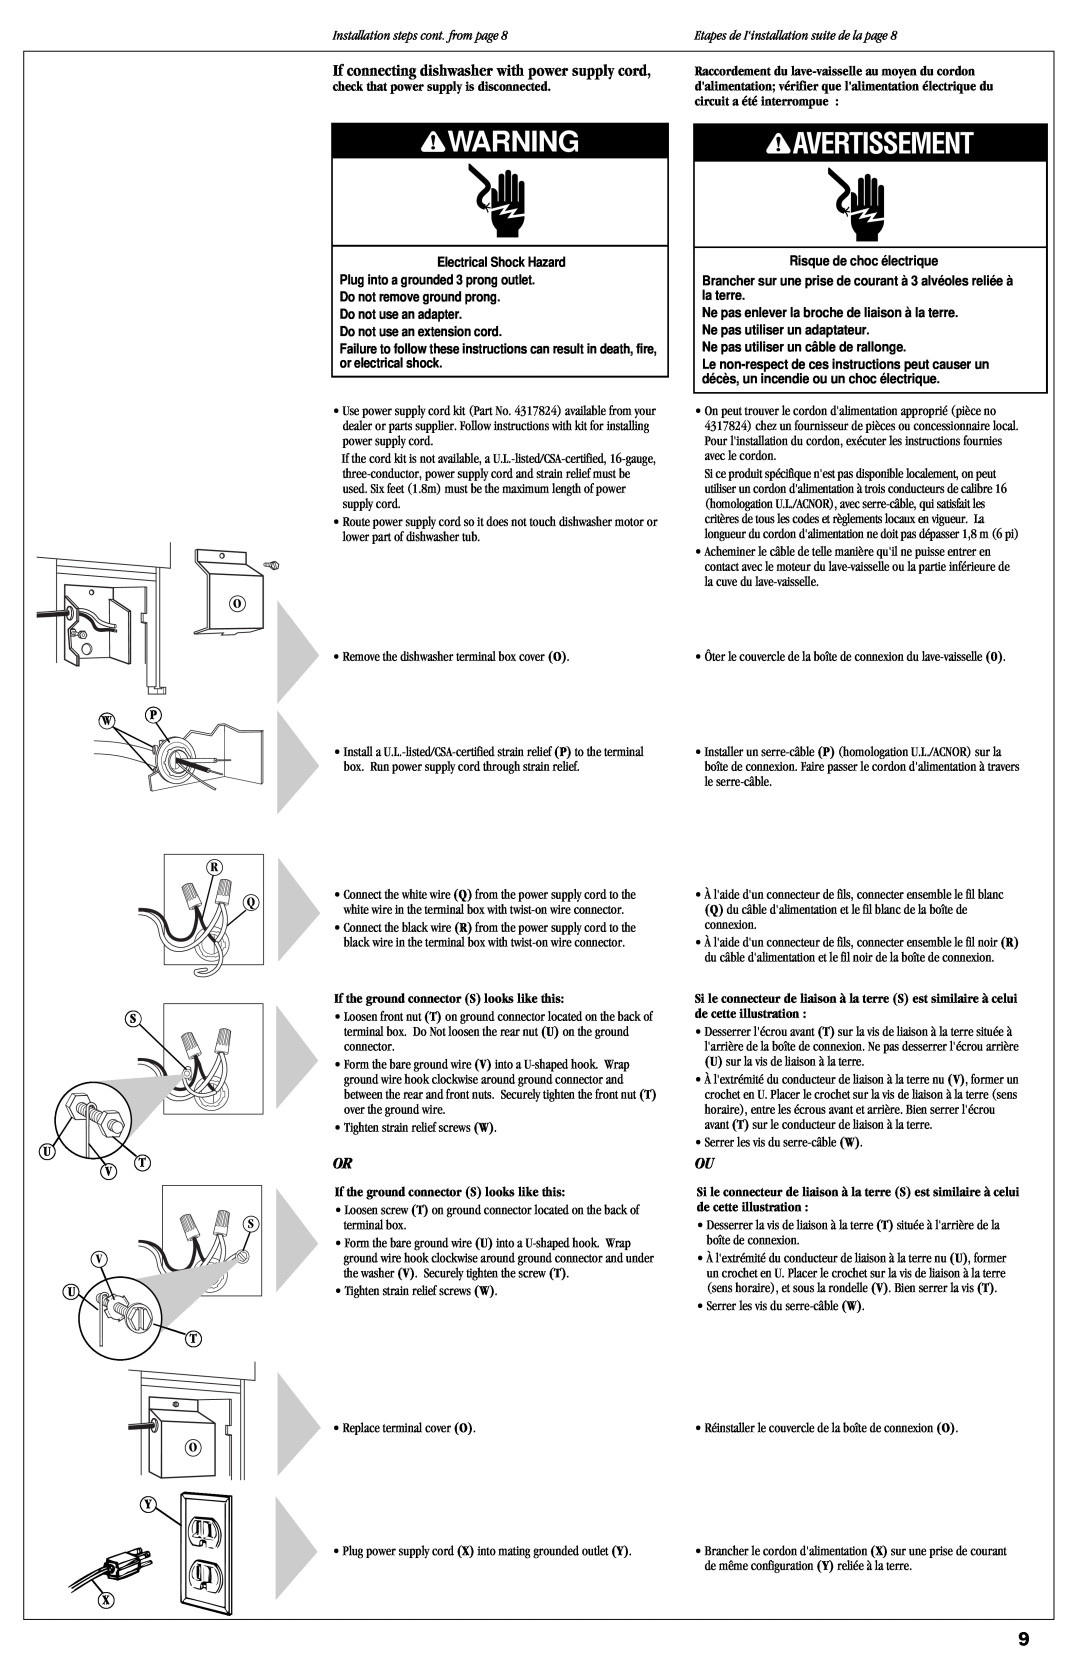 KitchenAid 9743822 If connecting dishwasher with power supply cord, Avertissement, Installation steps cont. from page 